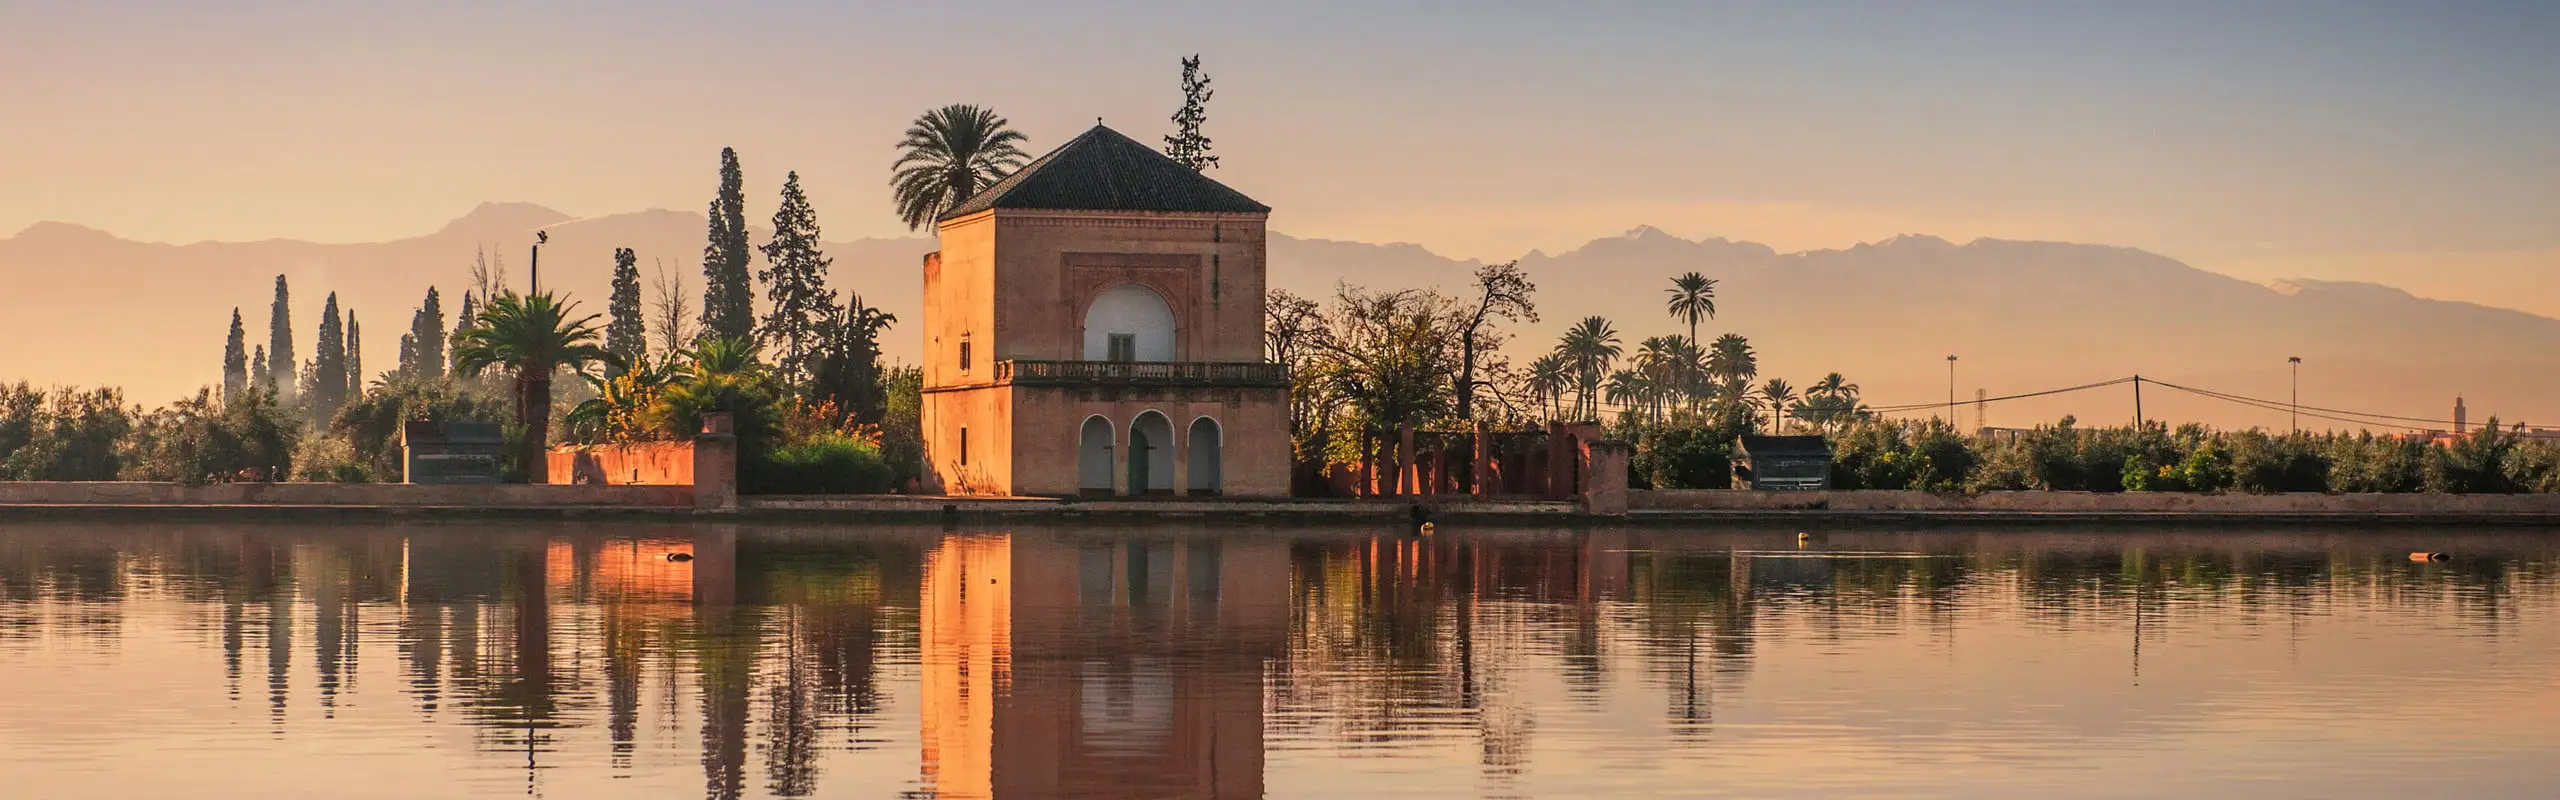 5 Things to Do in Marrakech